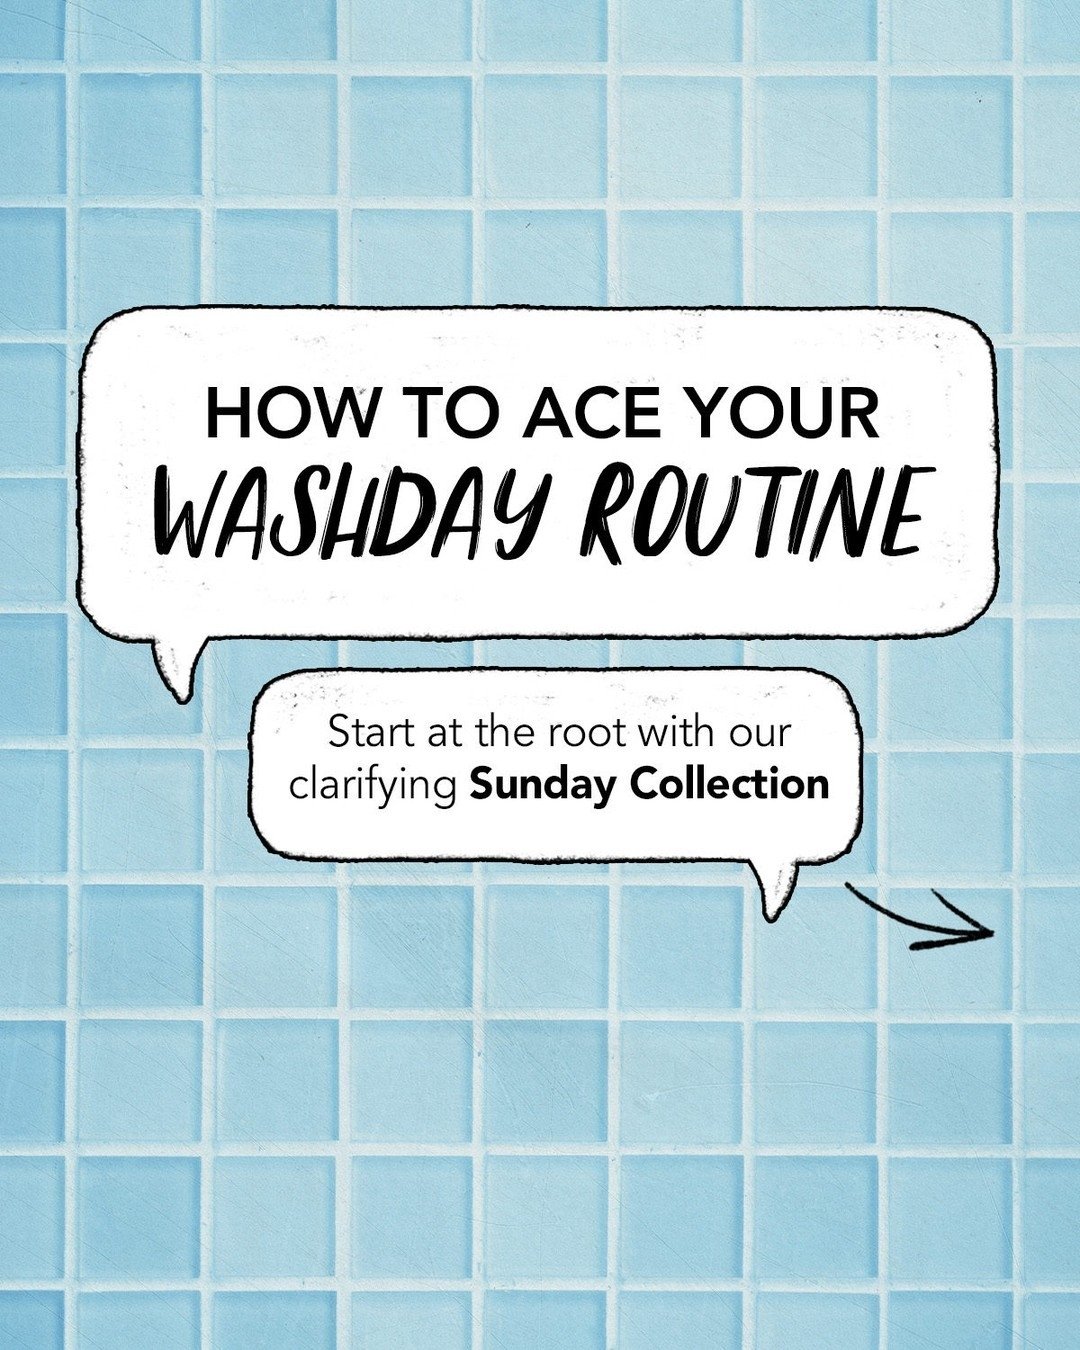 How to ace your washday? Swipe right to learn more
Sunday scalp-to-tip care that will prepare your hair for the week of great style to come.

#Bumbleandbumble #crueltyfree #BbSunday